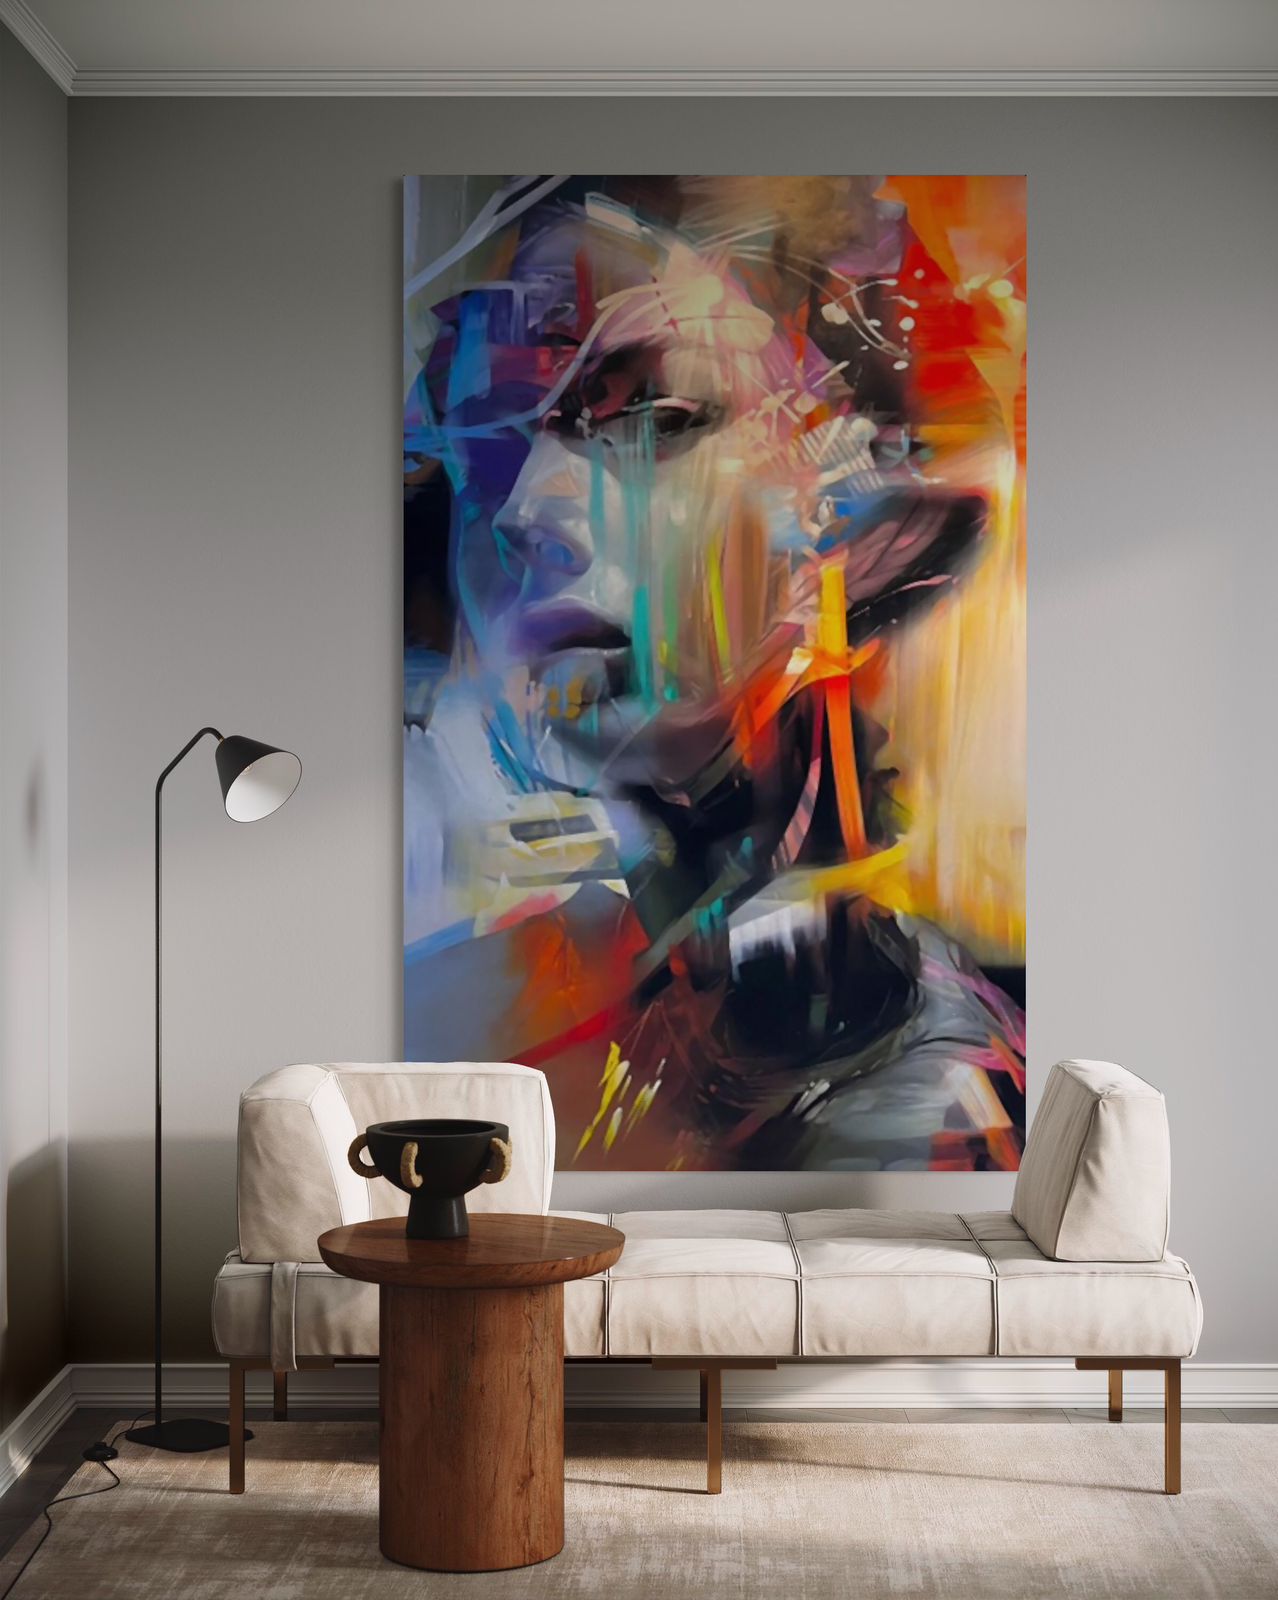 Espitia Fine Art - Limited Edition Original Painting - Woman Painting - ENIGMA - 59in x 94.5in | 150cm x 240cm - 2